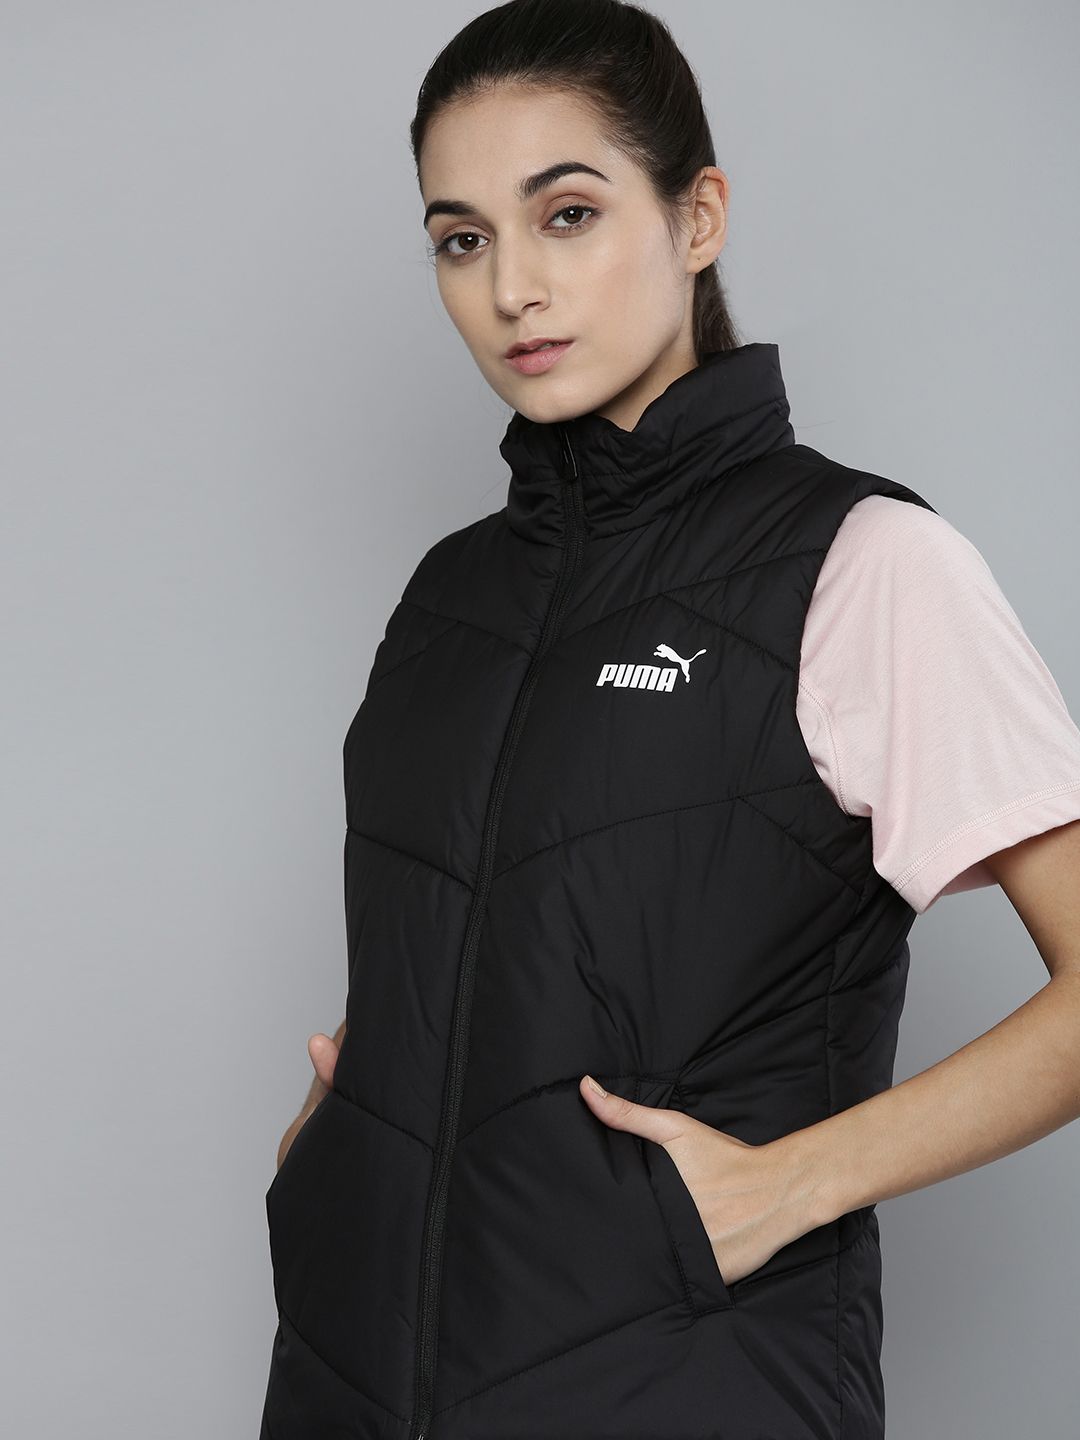 Puma Women Black Favourite windCELL Puffer Running Performance Vest Jacket Price in India